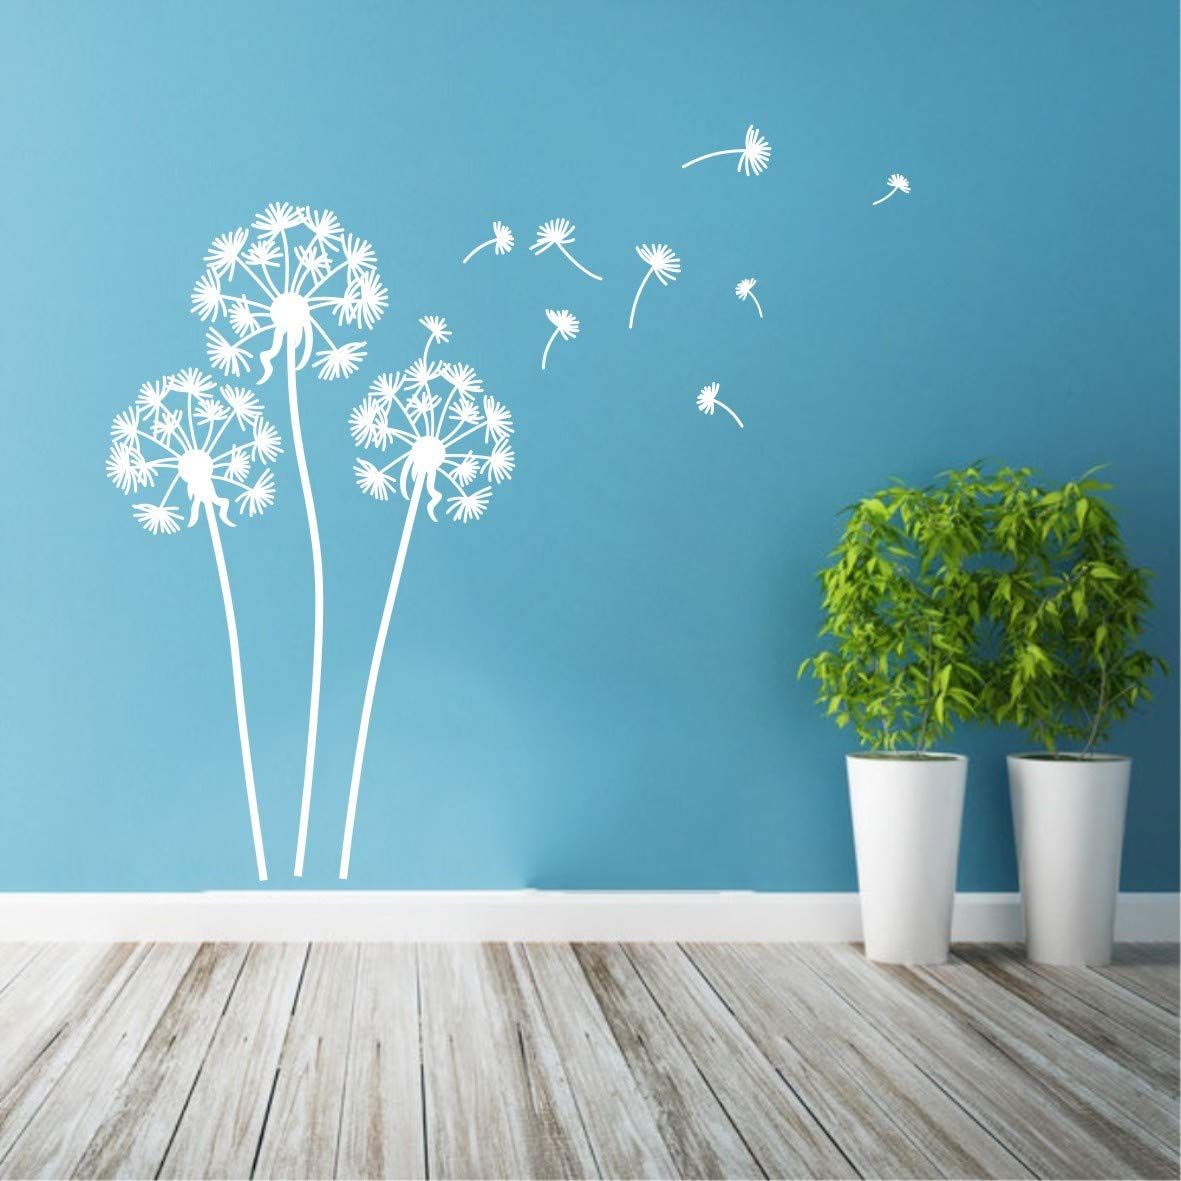 Wall Decal Flying Dandelion Plant Vinyl Wall Stickers Home Living Room Decor  Kids Nursery Room Removable Throughout 2018 Flying Dandelion Wall Art (View 16 of 20)